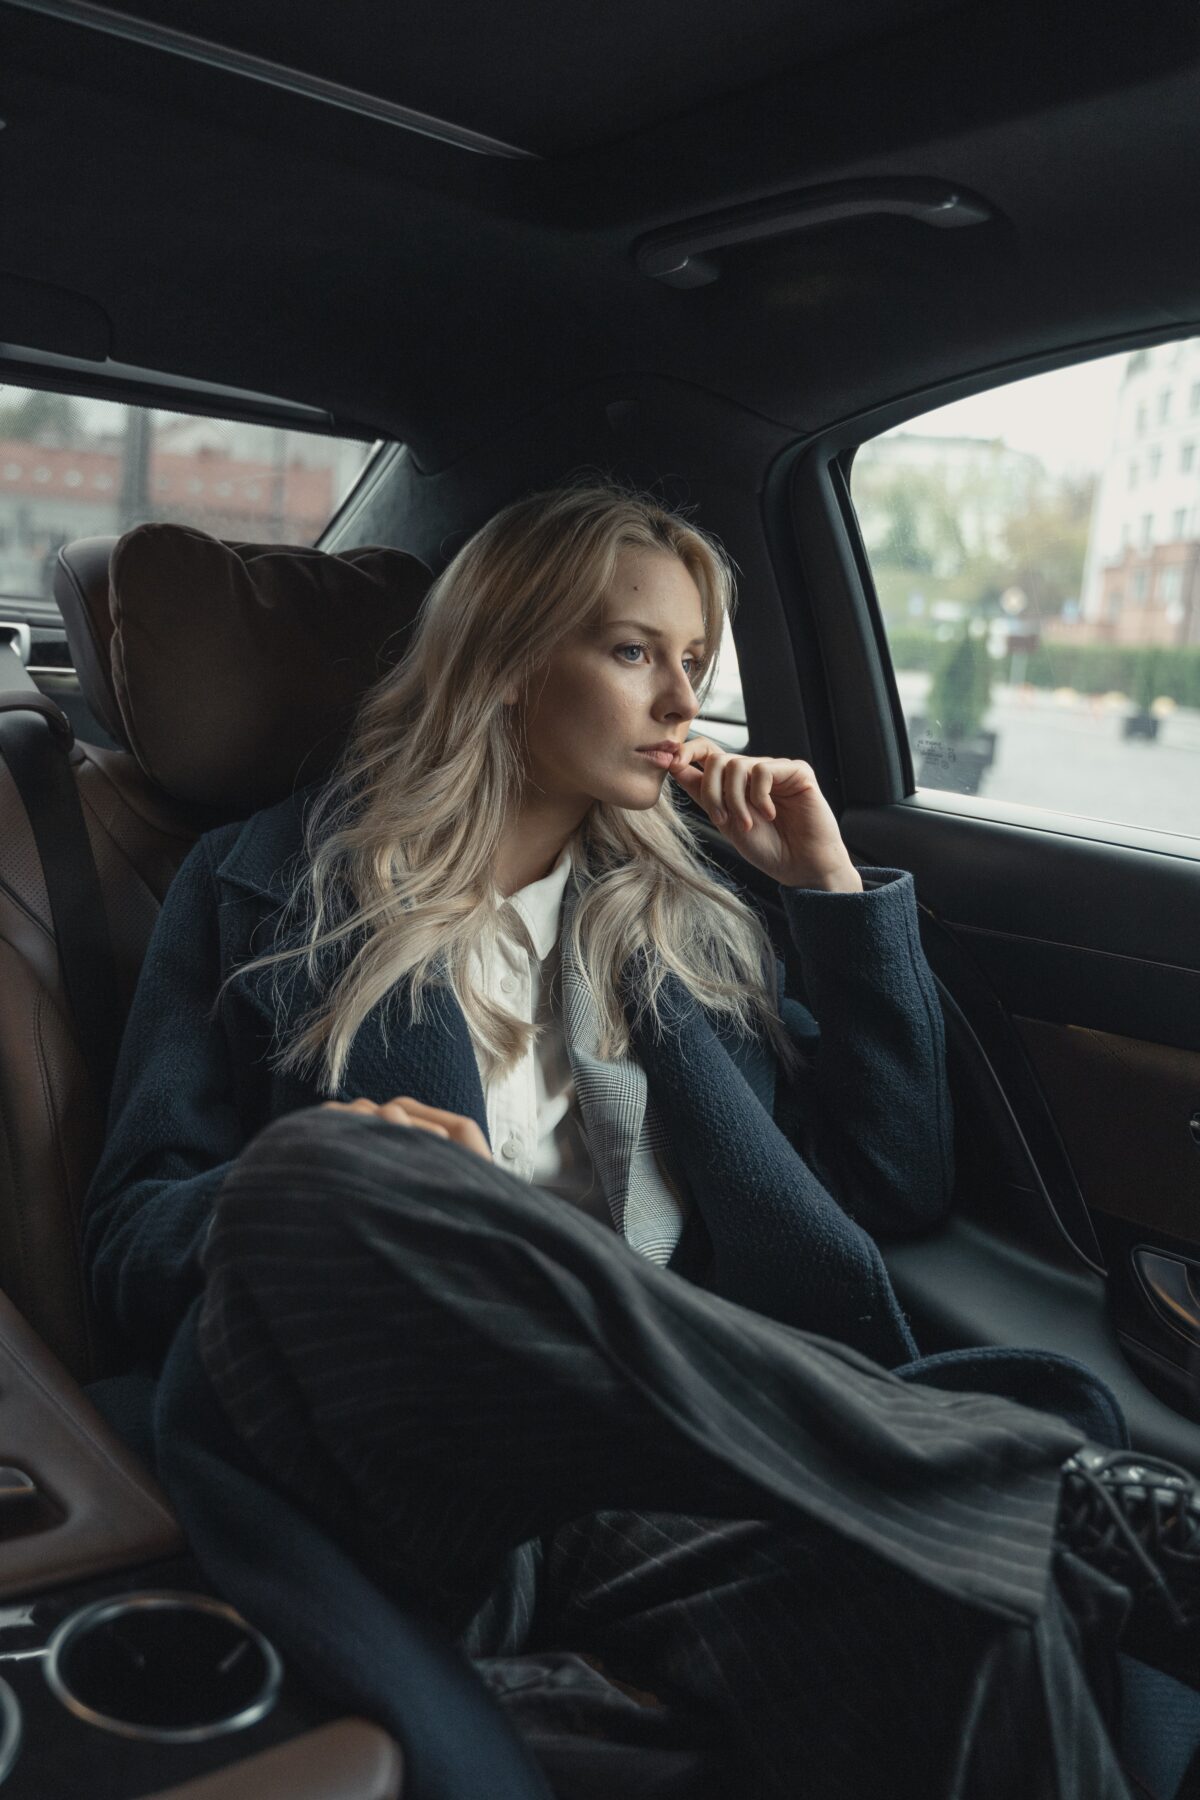 Woman looking pensive in the back seat of a car.